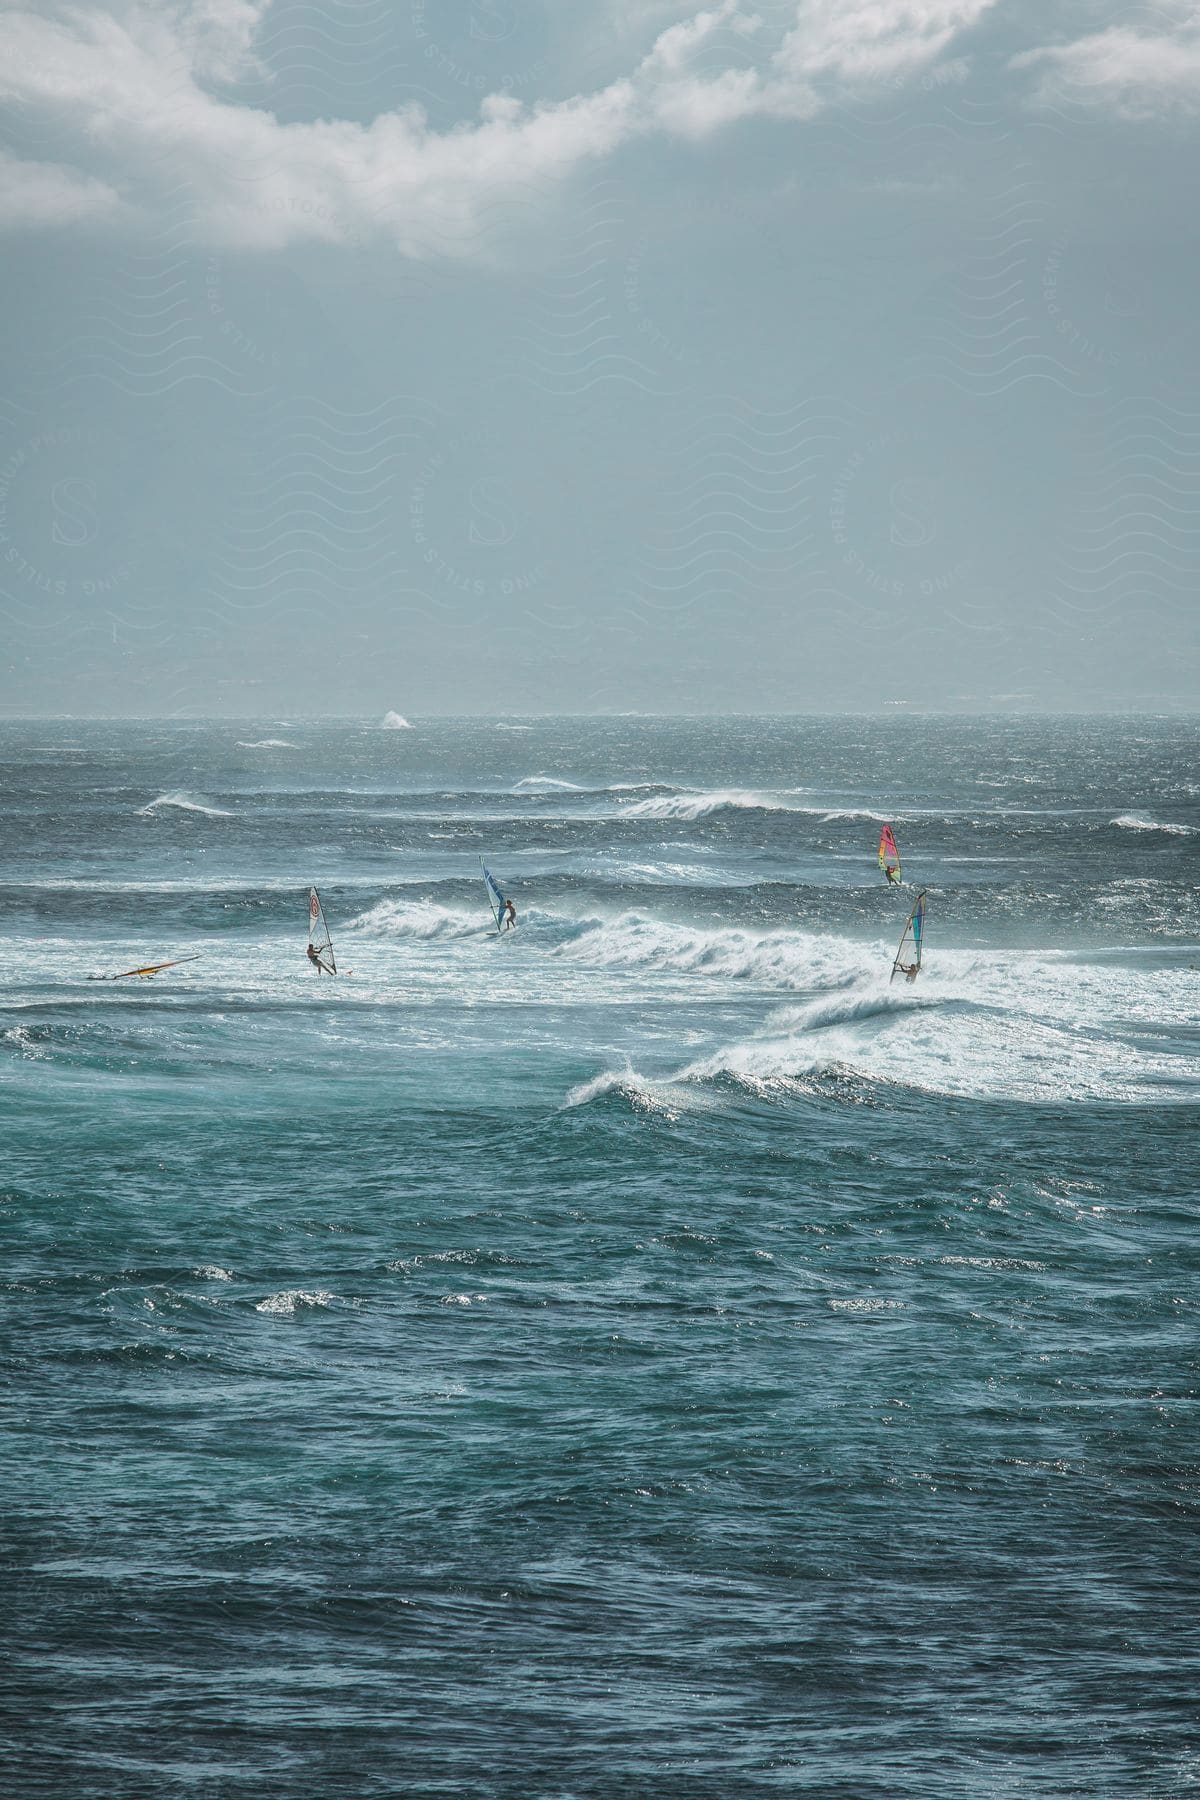 People out in the open sea practicing windsurfing.